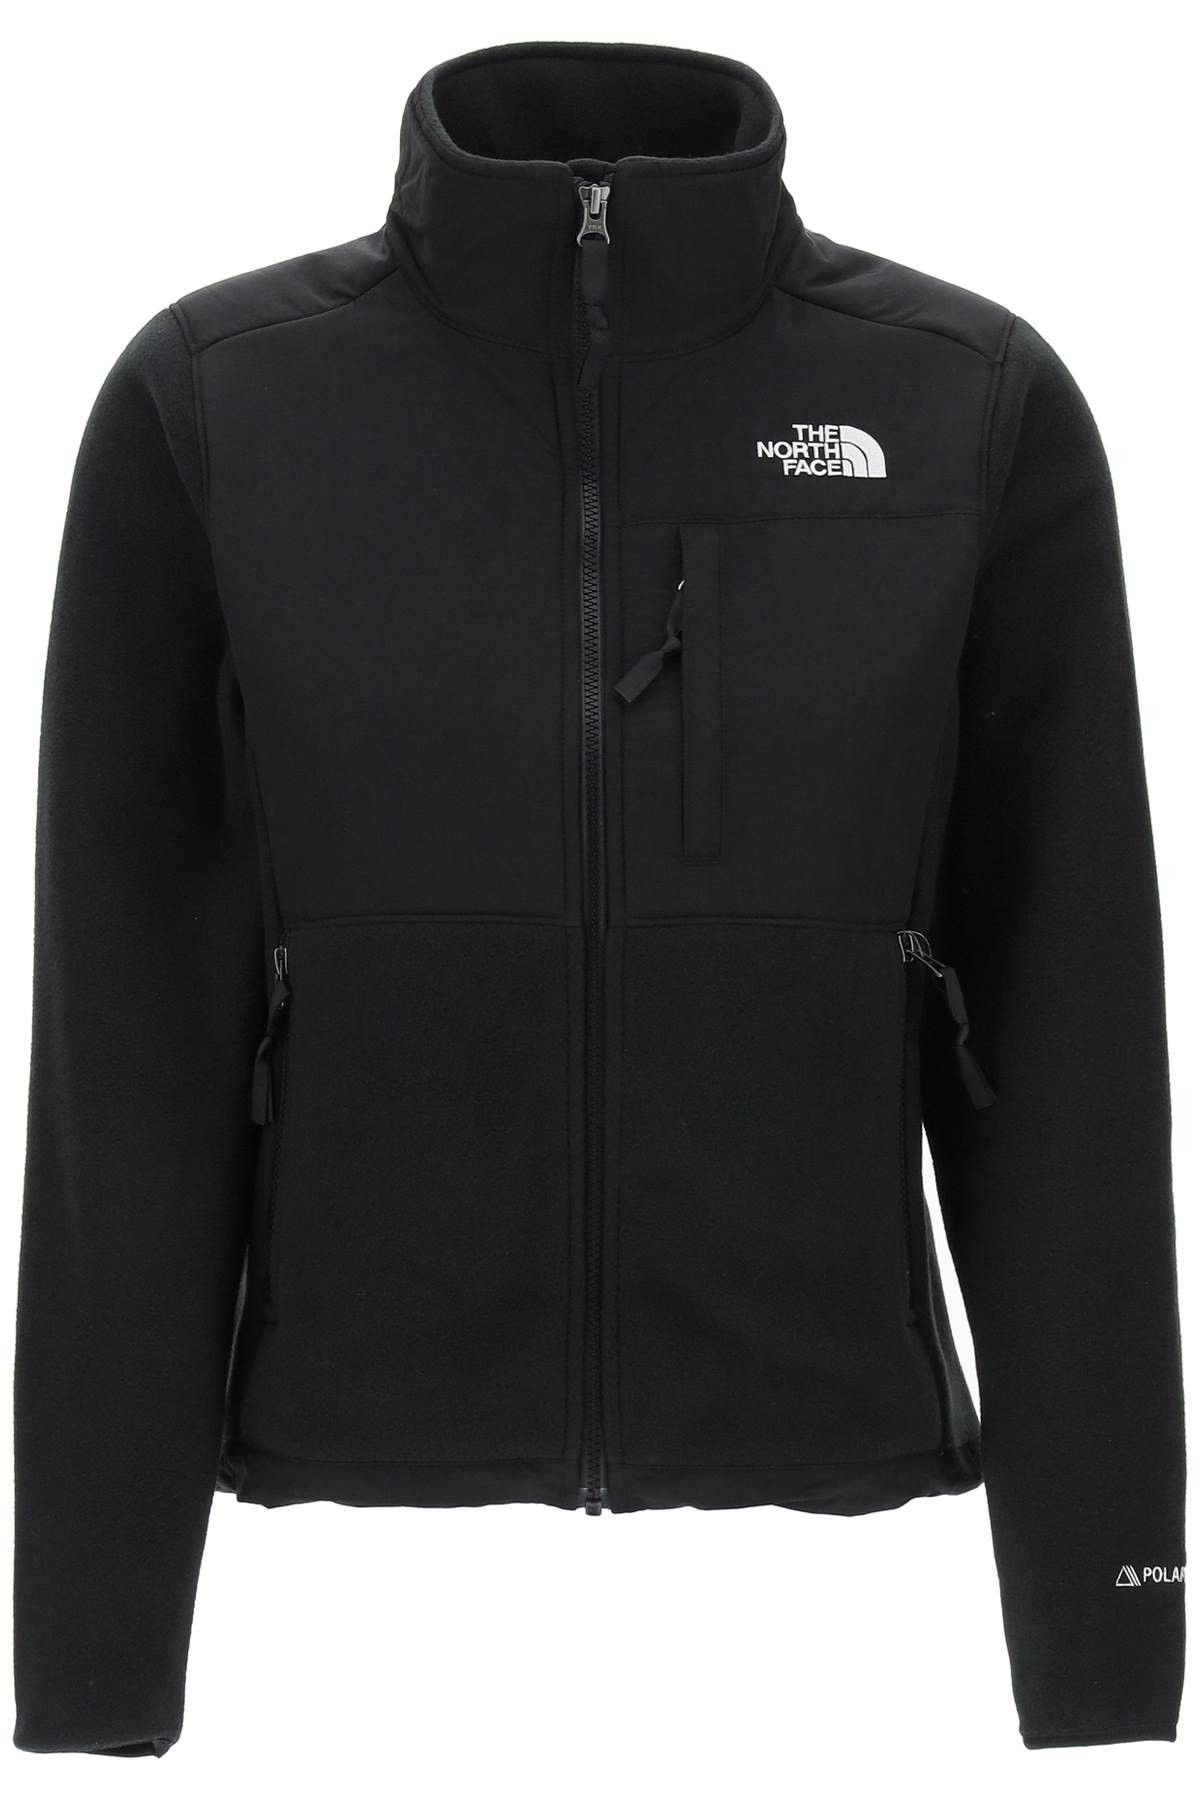 The North Face denali jacket in fleece and nylon | Grailed